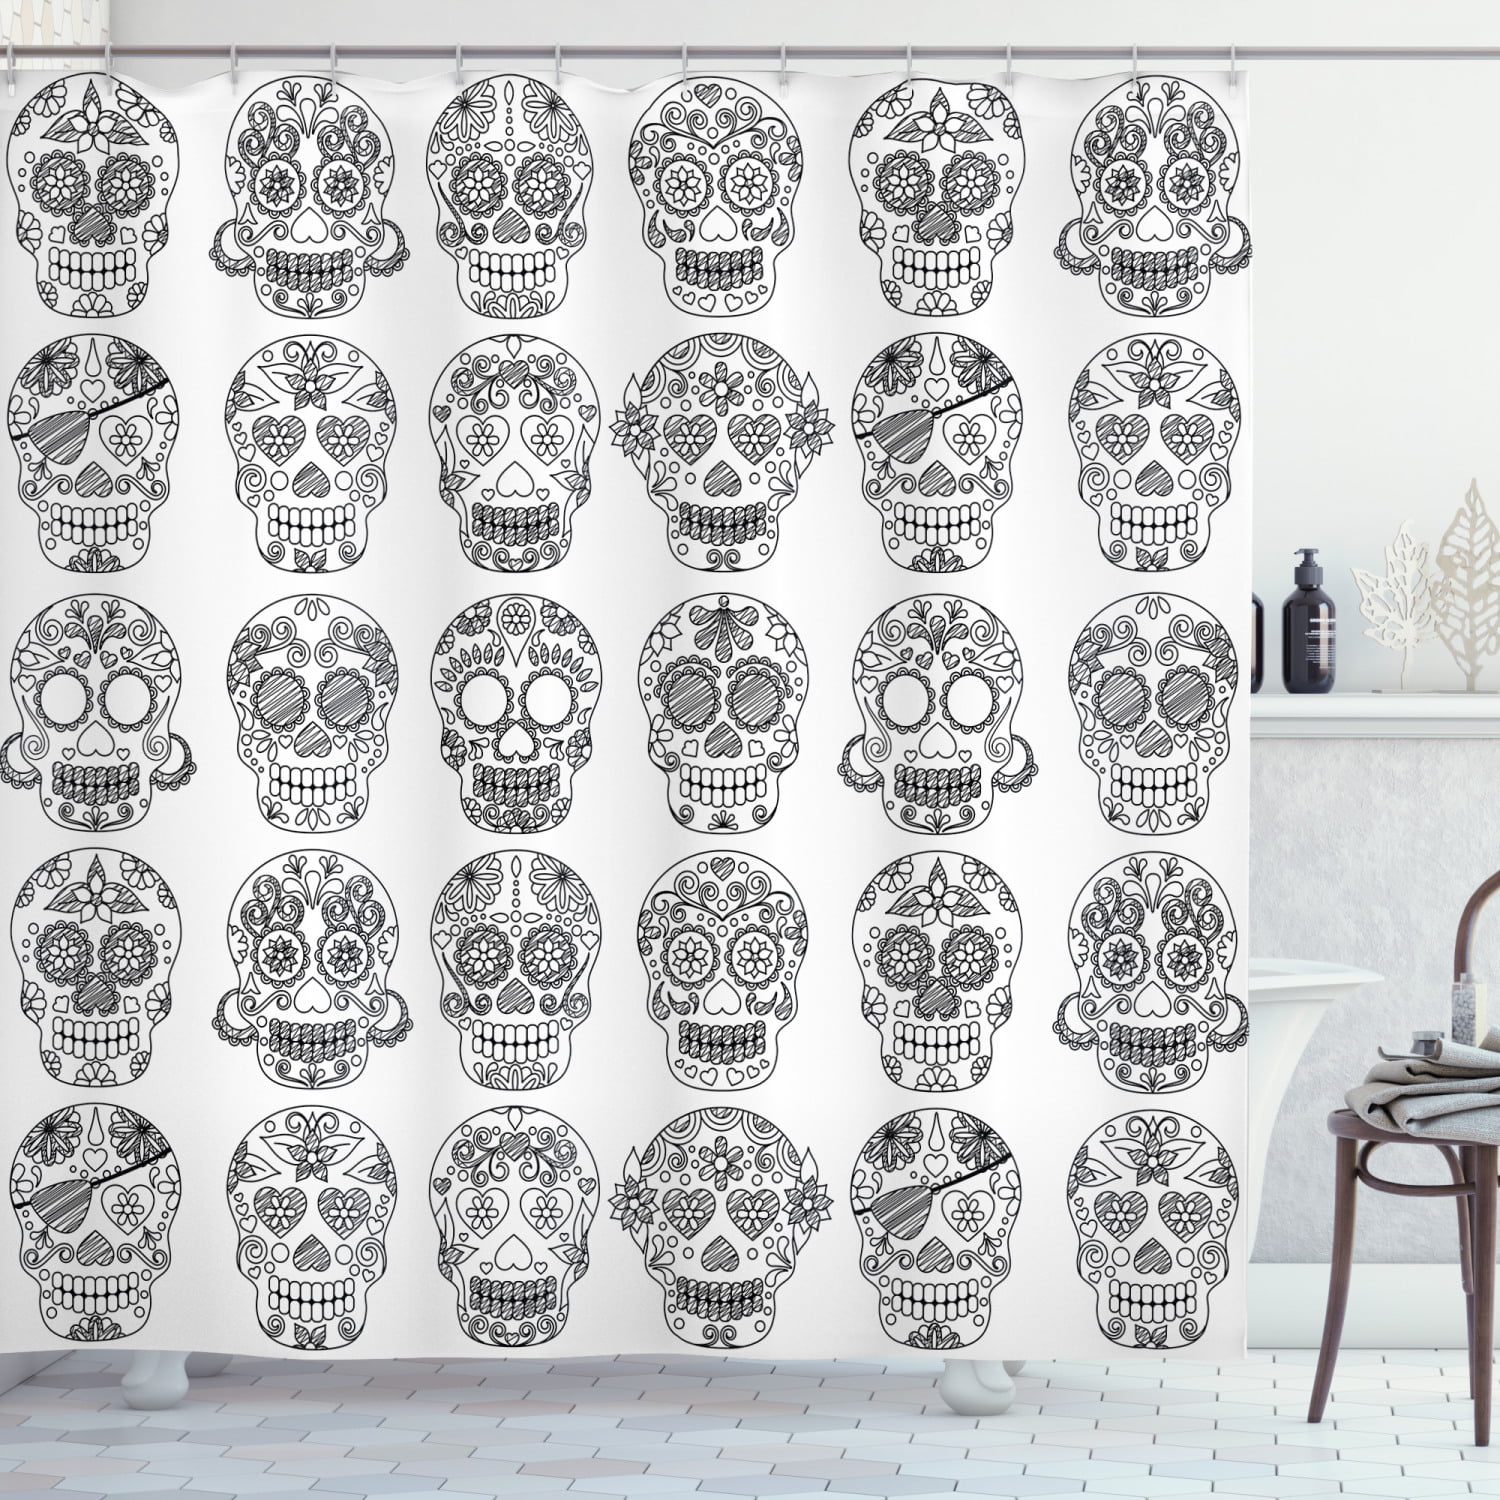 Details about   Shower Curtain Set Mexican Day Of The Dead Skull Bathroom Mat Waterproof Fabric 